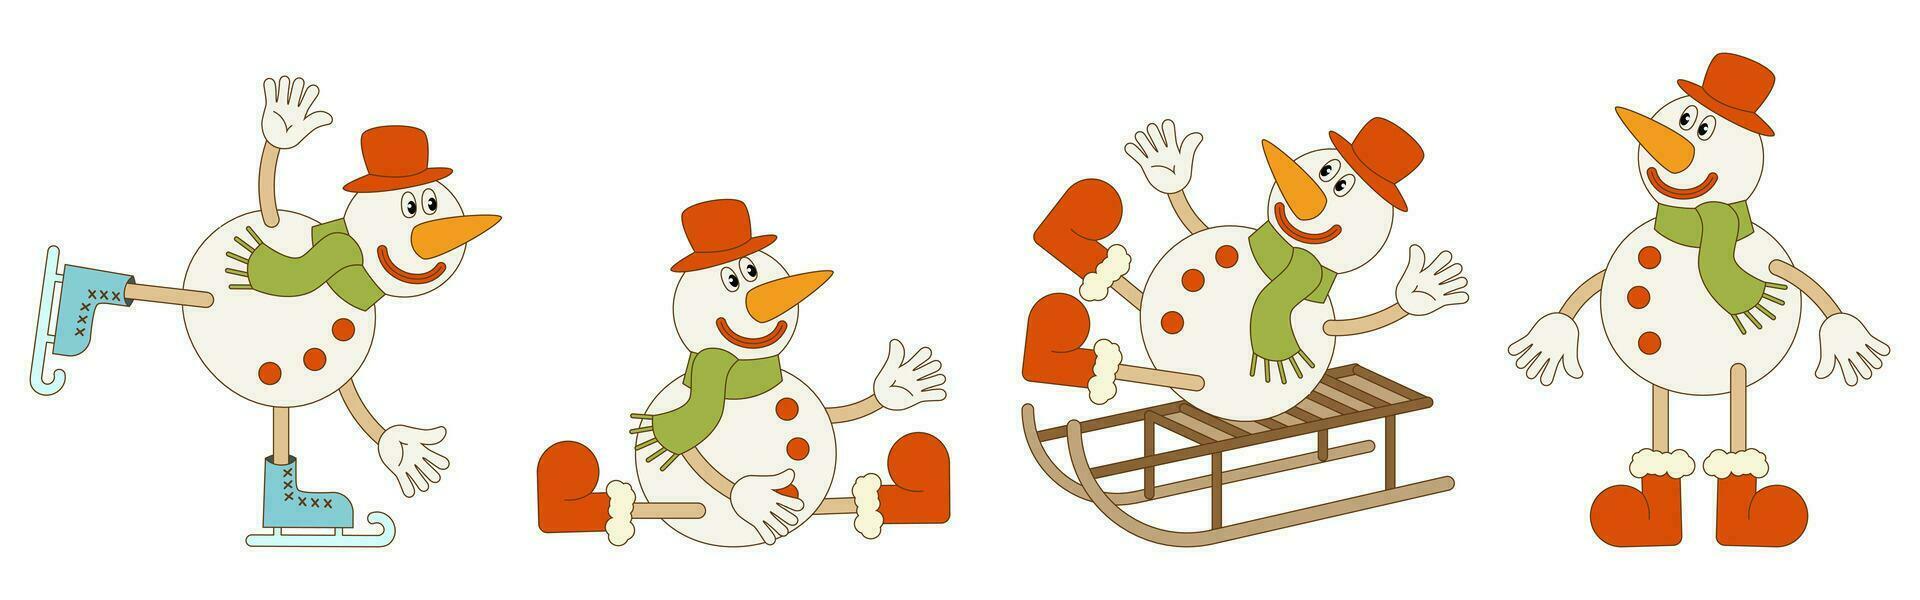 Set of Christmas snowmen in different poses. Vector illustration in trendy groovy retro style. White background.